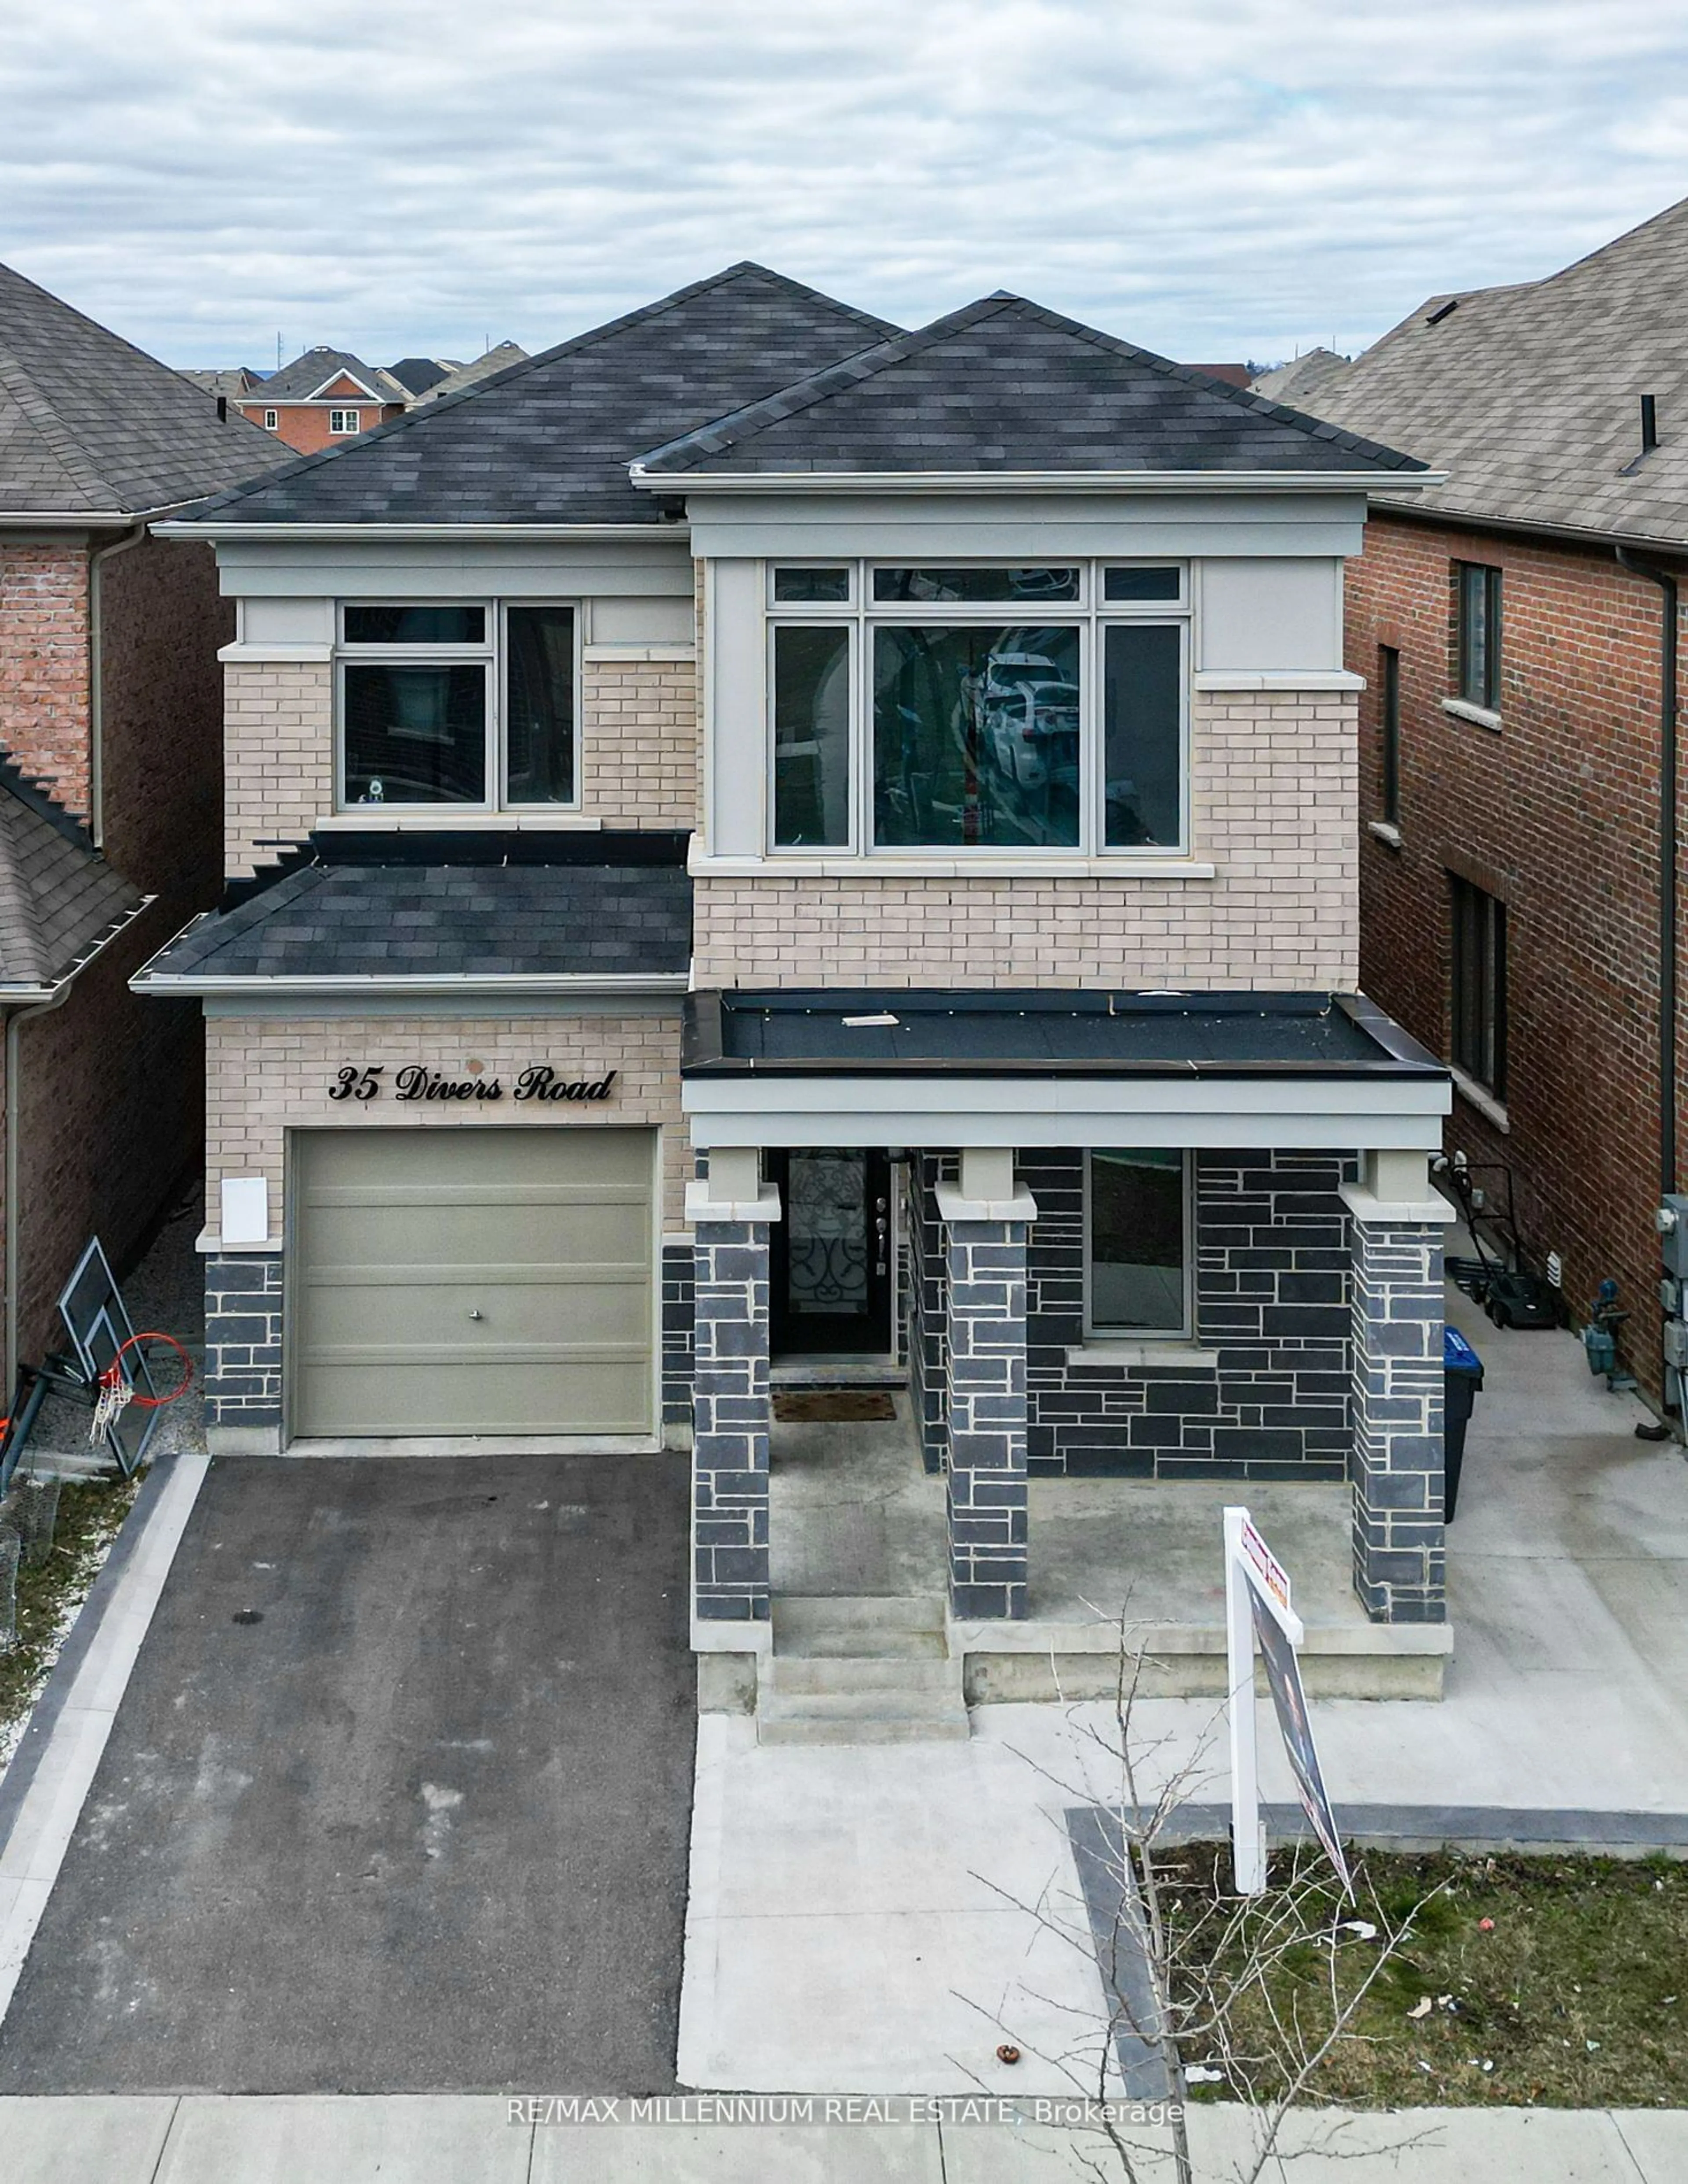 Home with brick exterior material for 35 Divers Rd, Brampton Ontario L7A 5C8